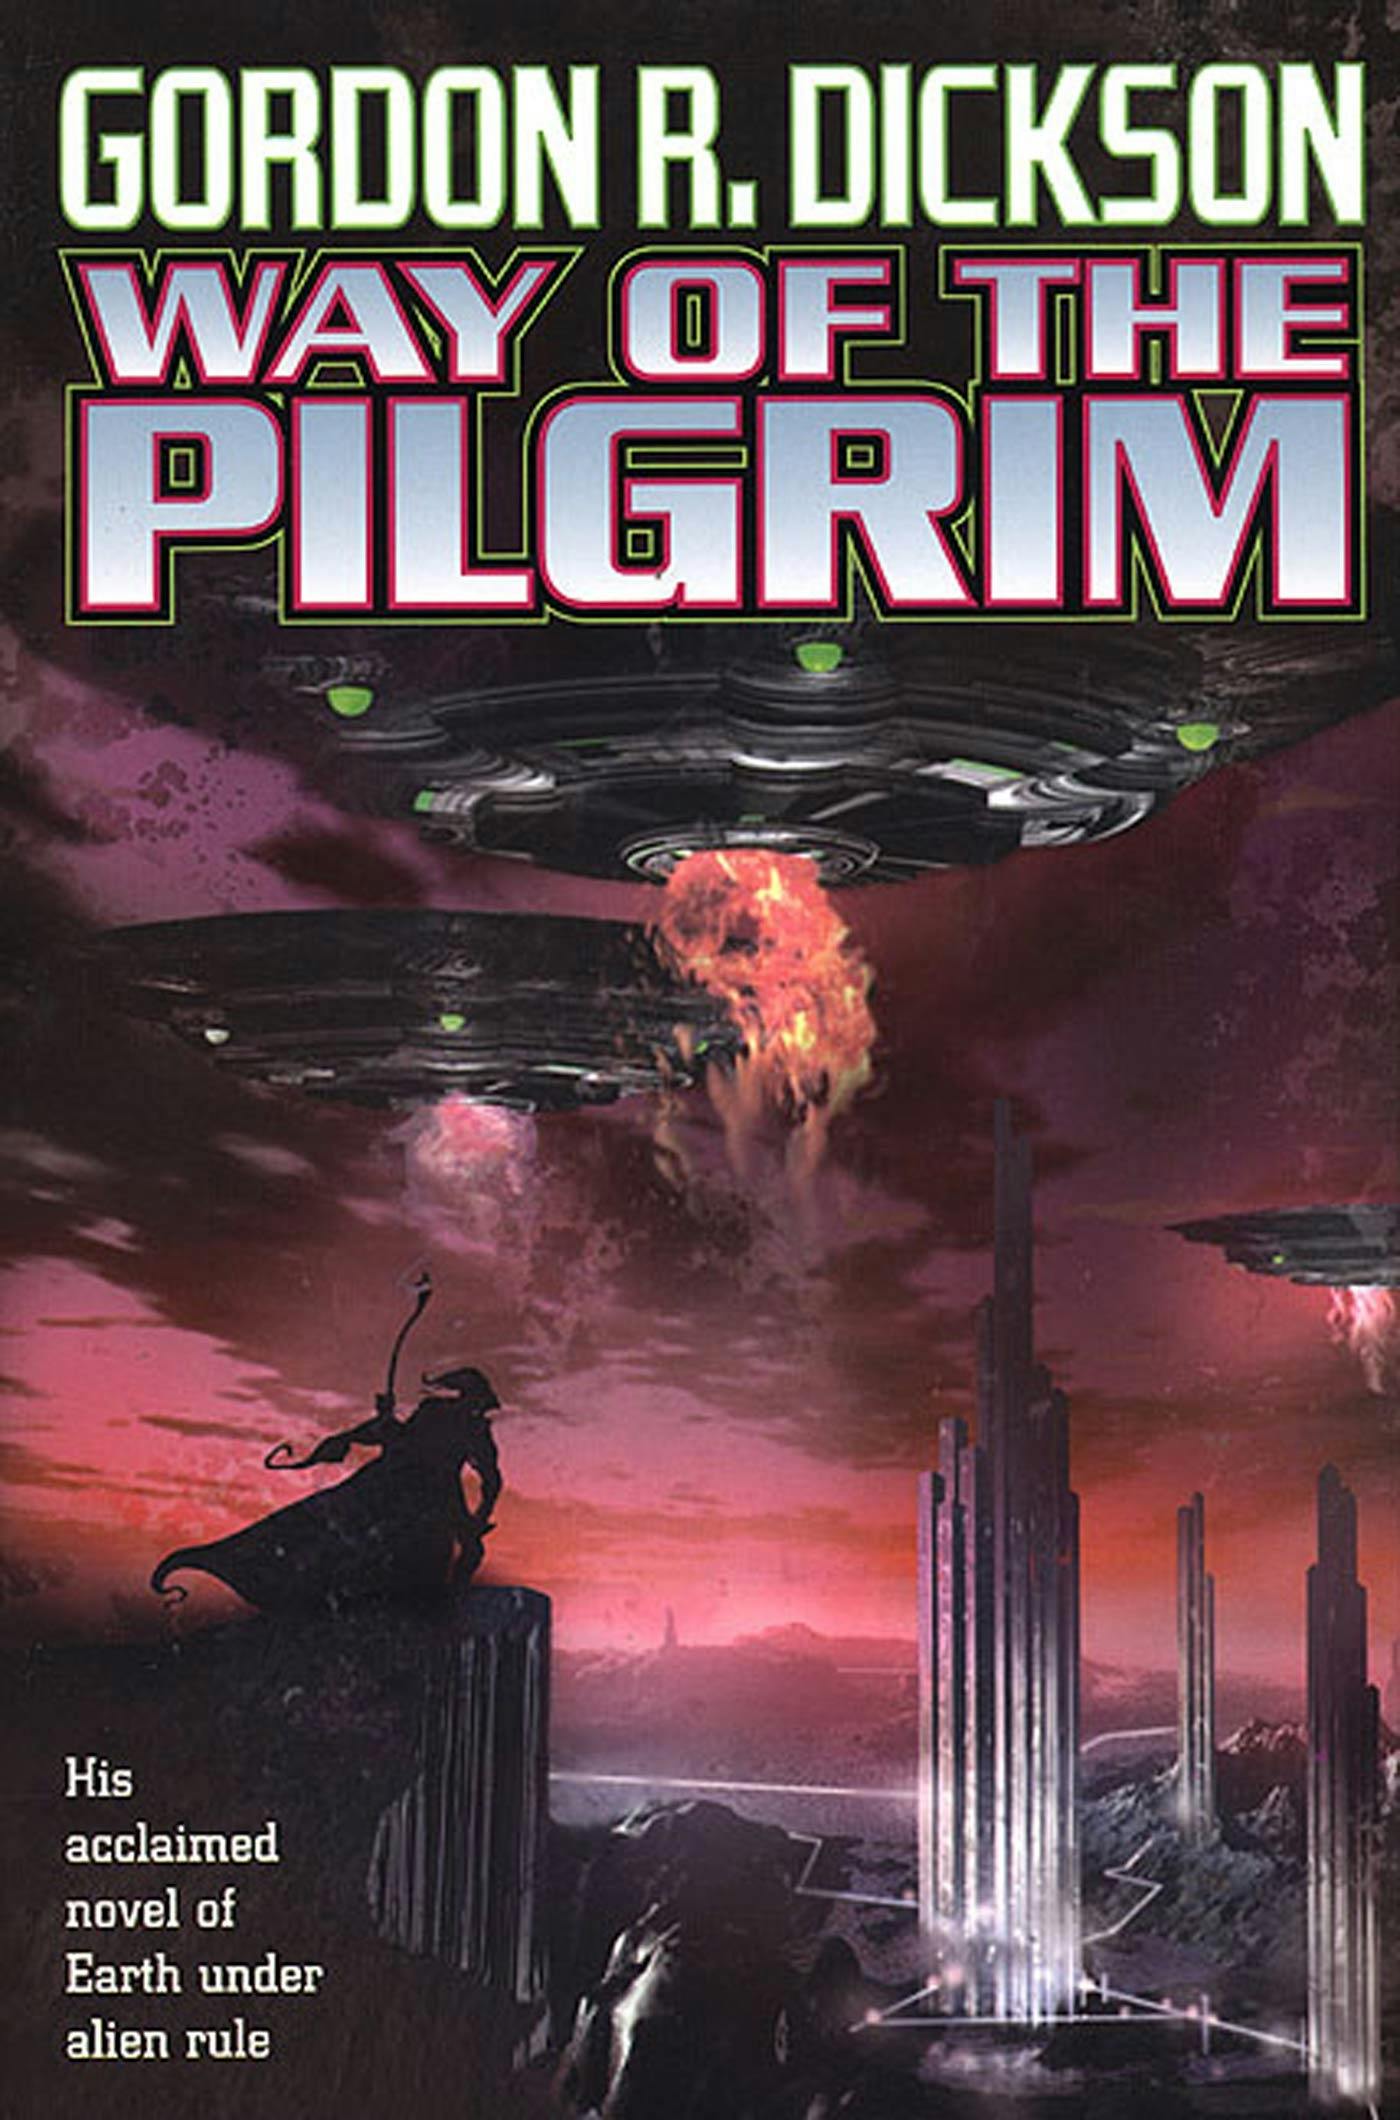 Cover for the book titled as: Way of the Pilgrim